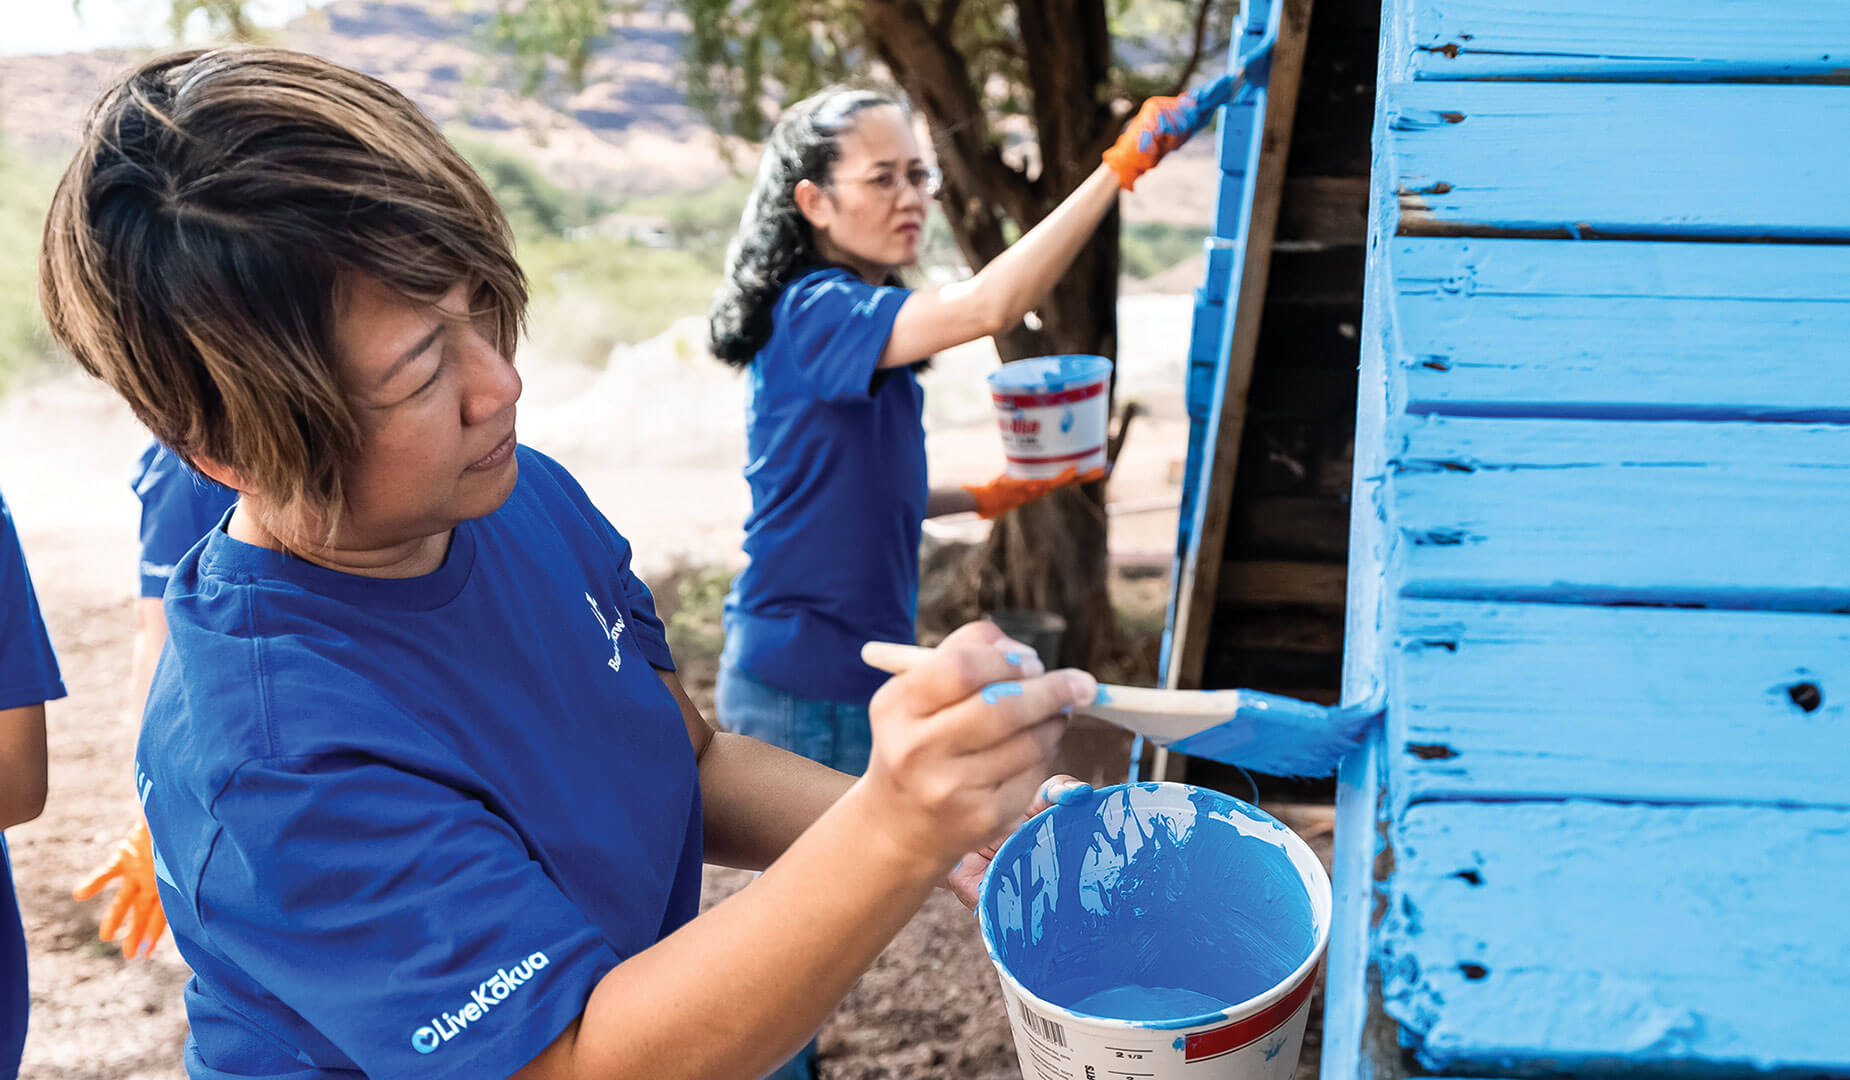 employee painting at Na Oiwi Aloha community service event